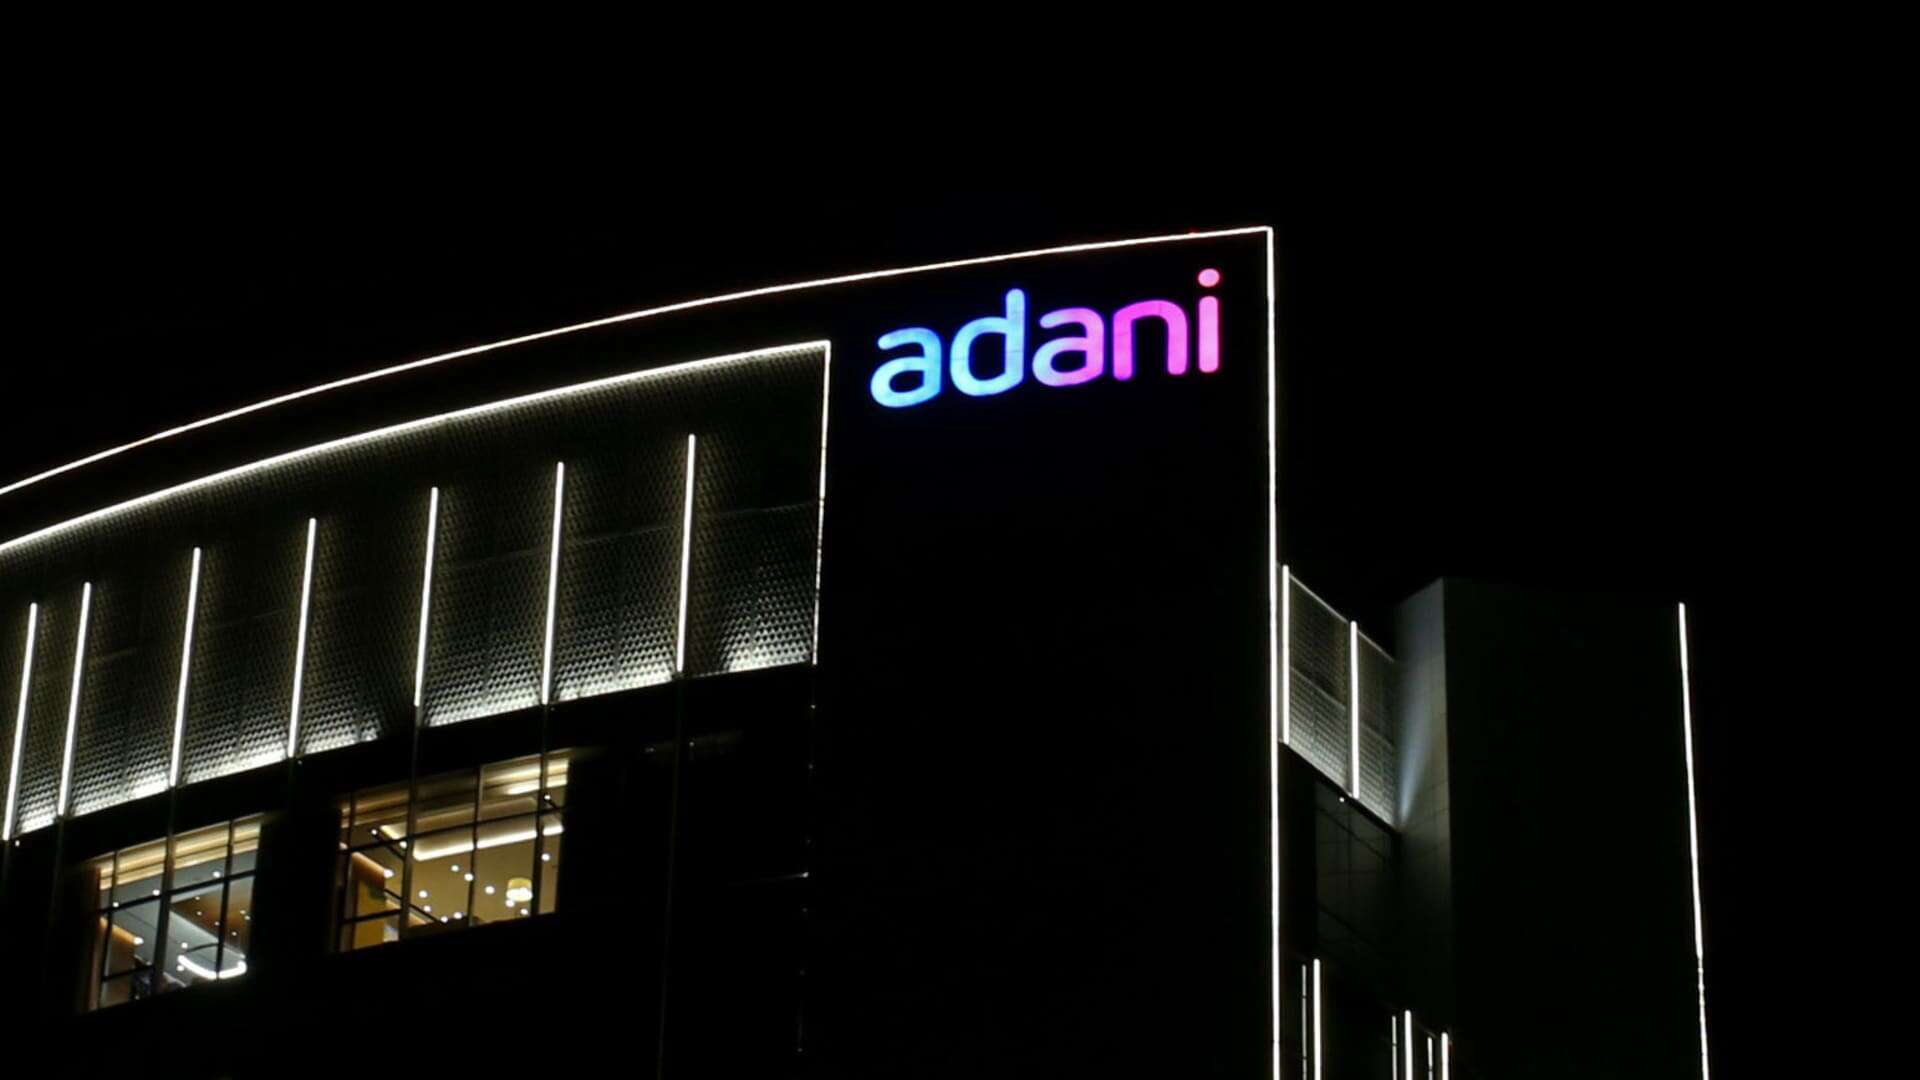 Deloitte’s resignation as auditor is confirmed by Adani Ports